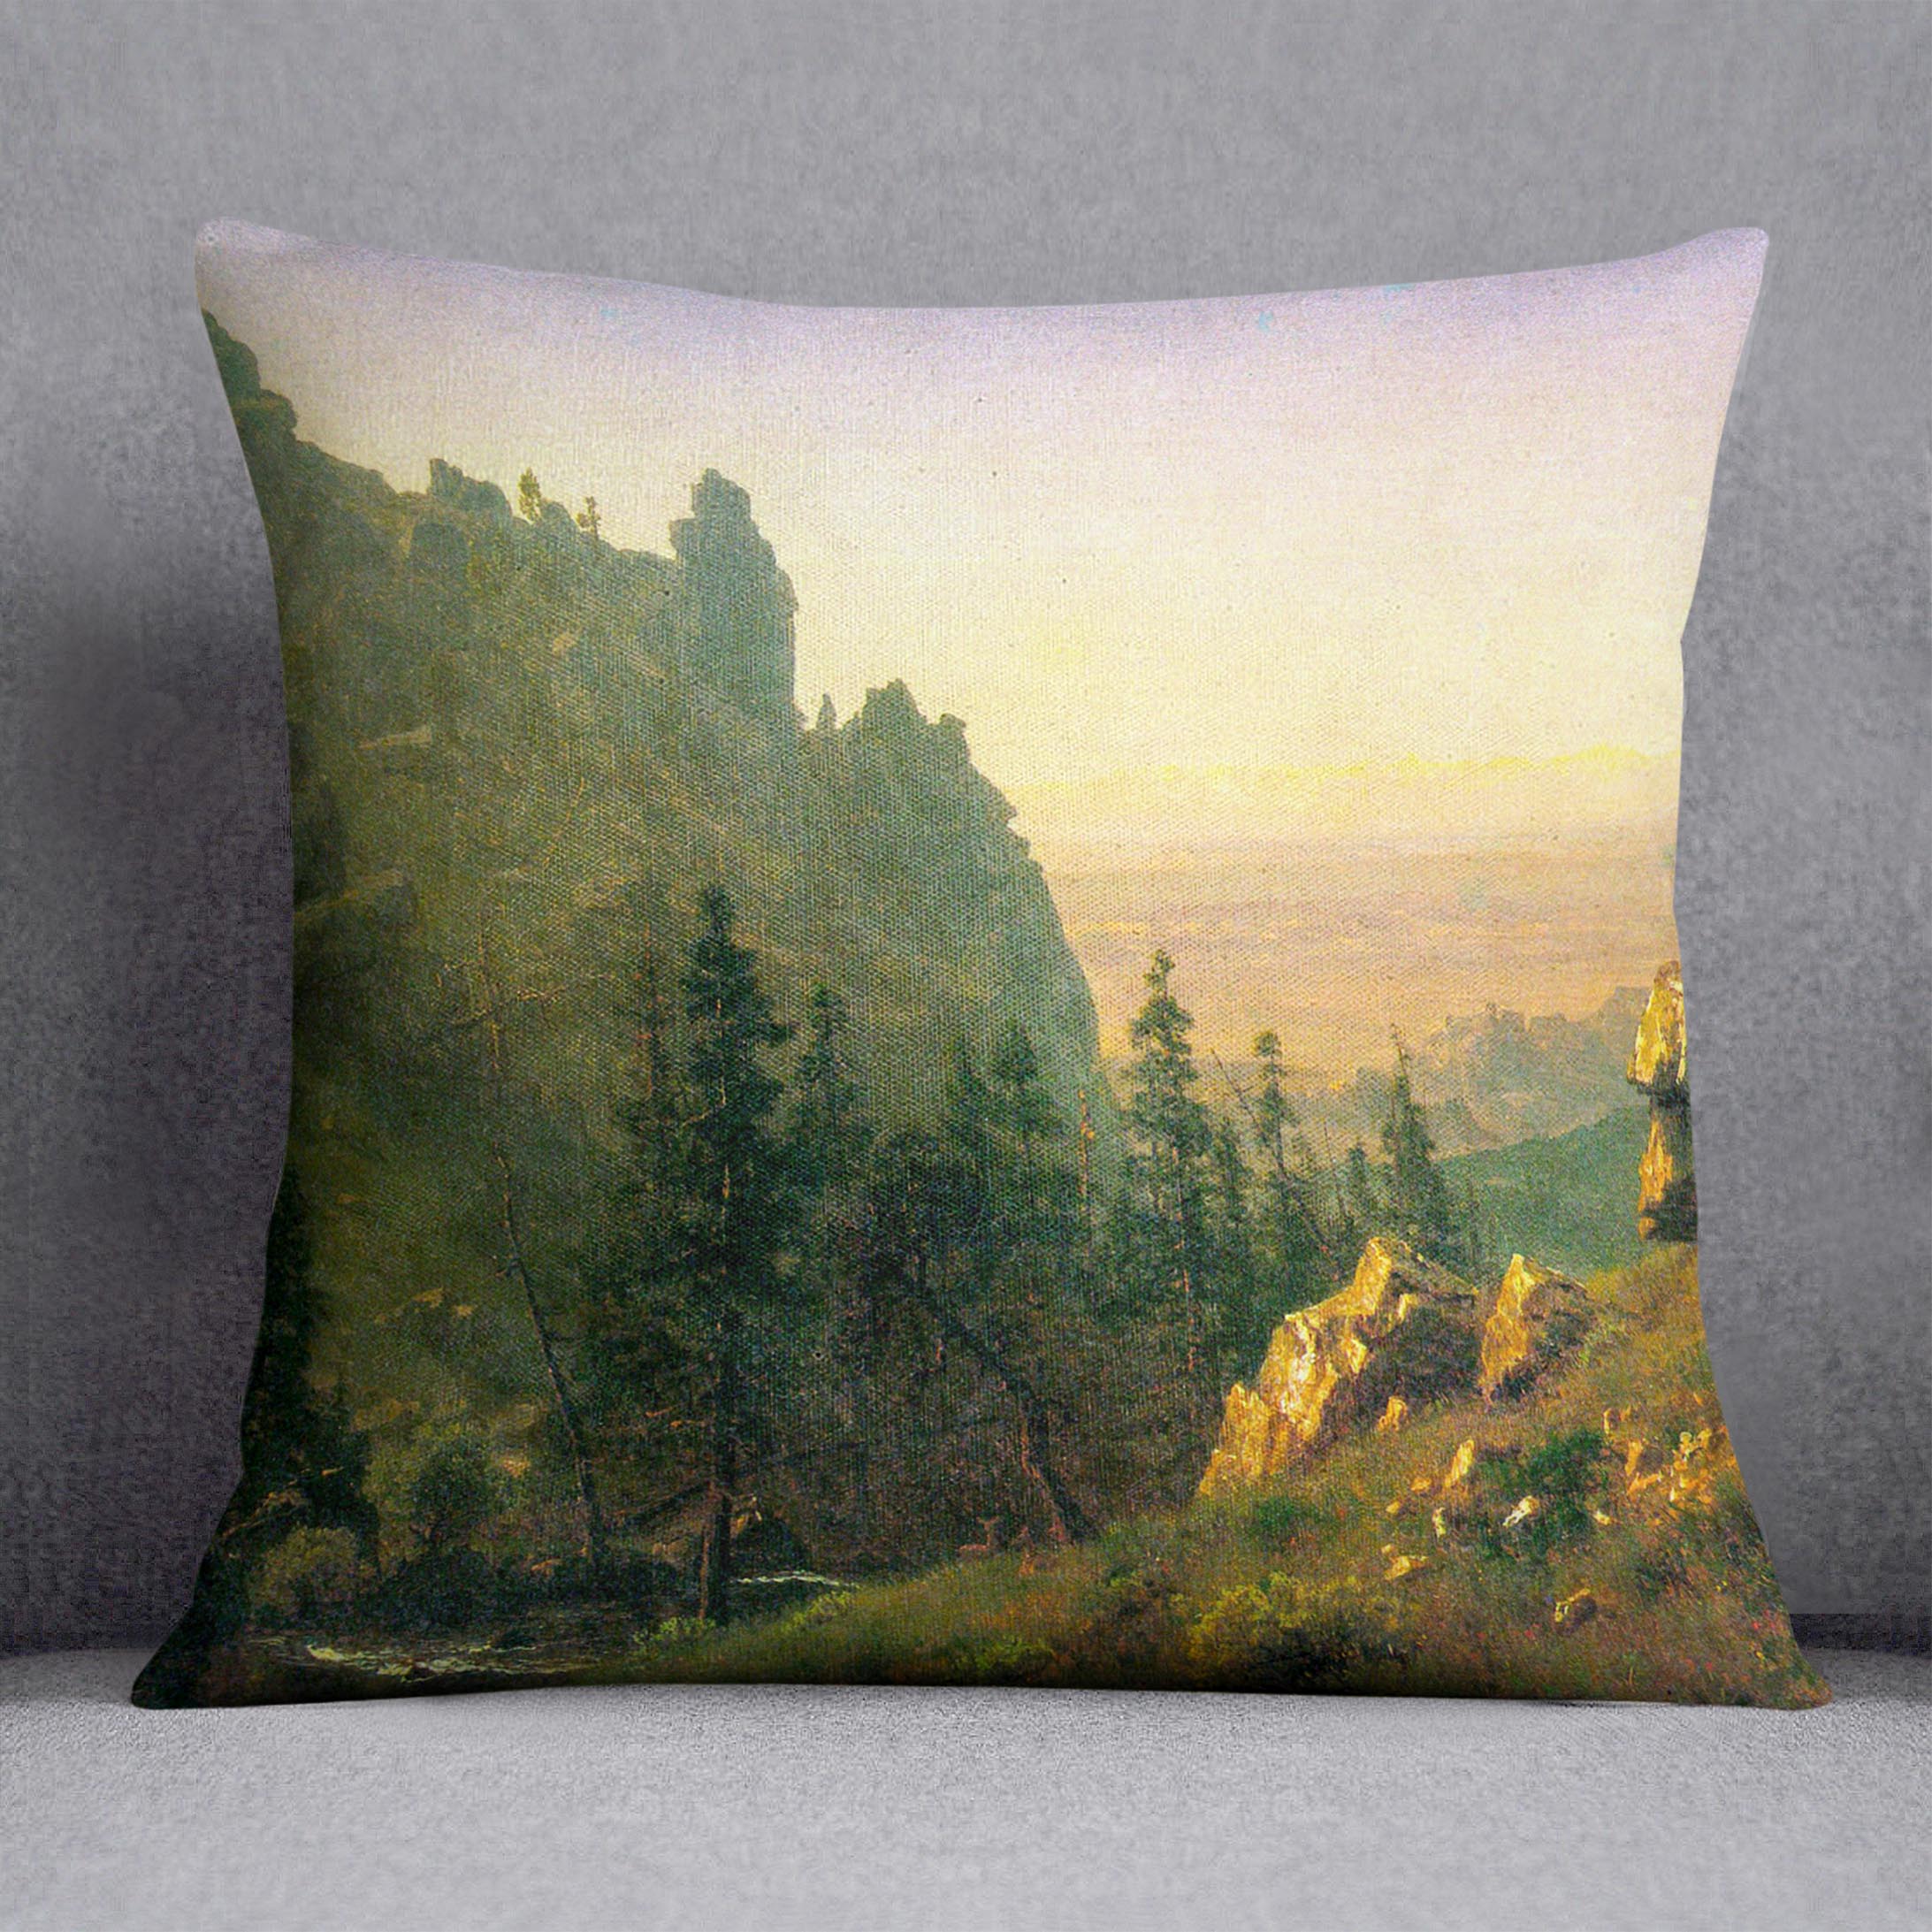 Wind River Country by Bierstadt Cushion - Canvas Art Rocks - 1